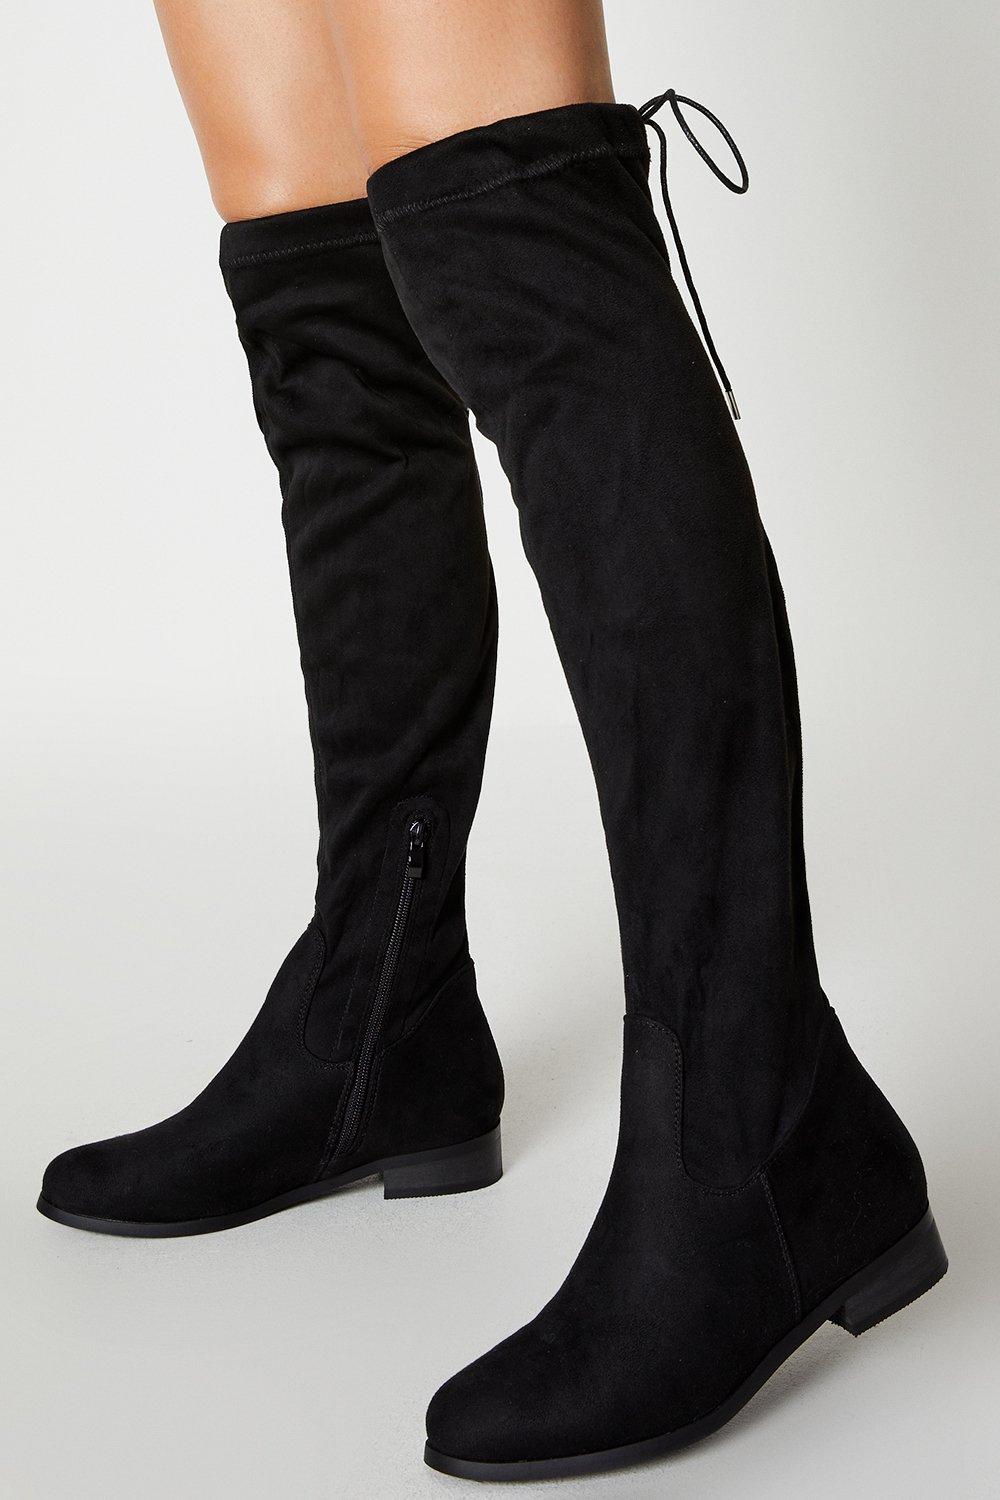 Women’s Kelly Flat Over The Knee Boots - natural black - 7